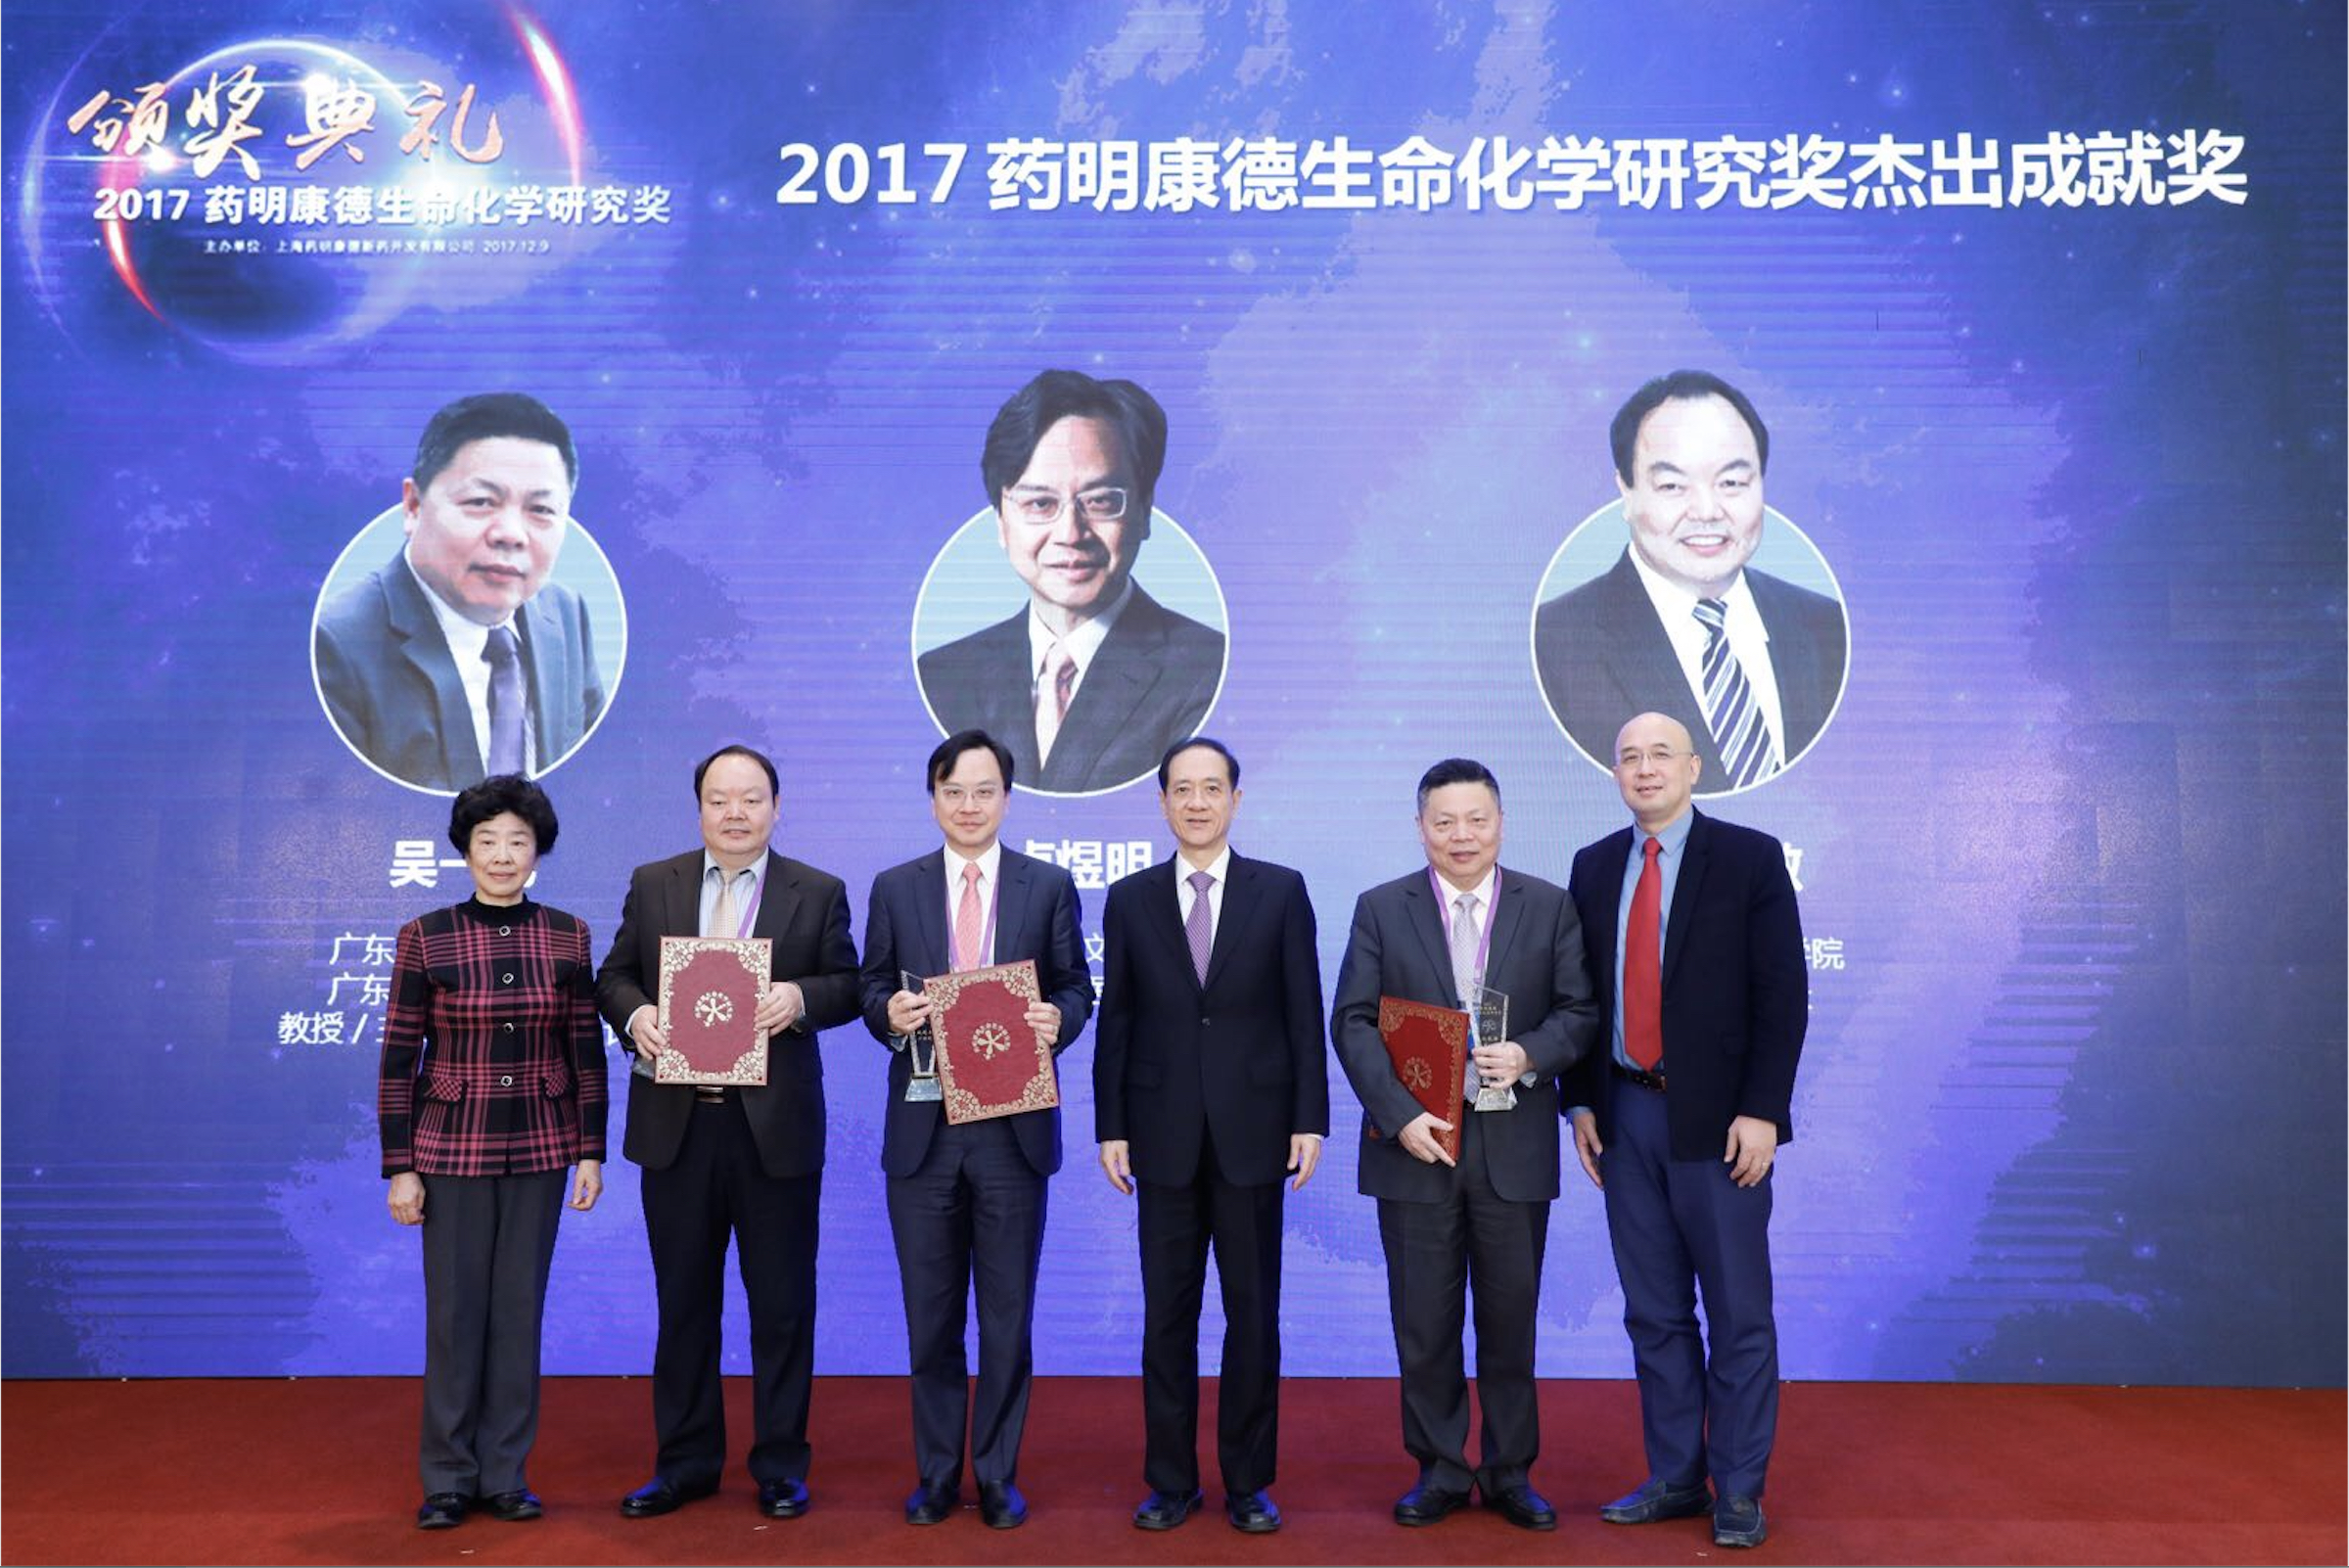  (3rd from left) Prof. Dennis LO receives Outstanding Achievements Award of the 11th annual WuXi PharmaTech Life Science and Chemistry Awards presented by (3rd from right) Prof. Qide HAN, Honorary Vice-Chairman of the Awards Committee and Vice-Chairman of the 12th National Committee of the Chinese People's Political Consultative Conference.